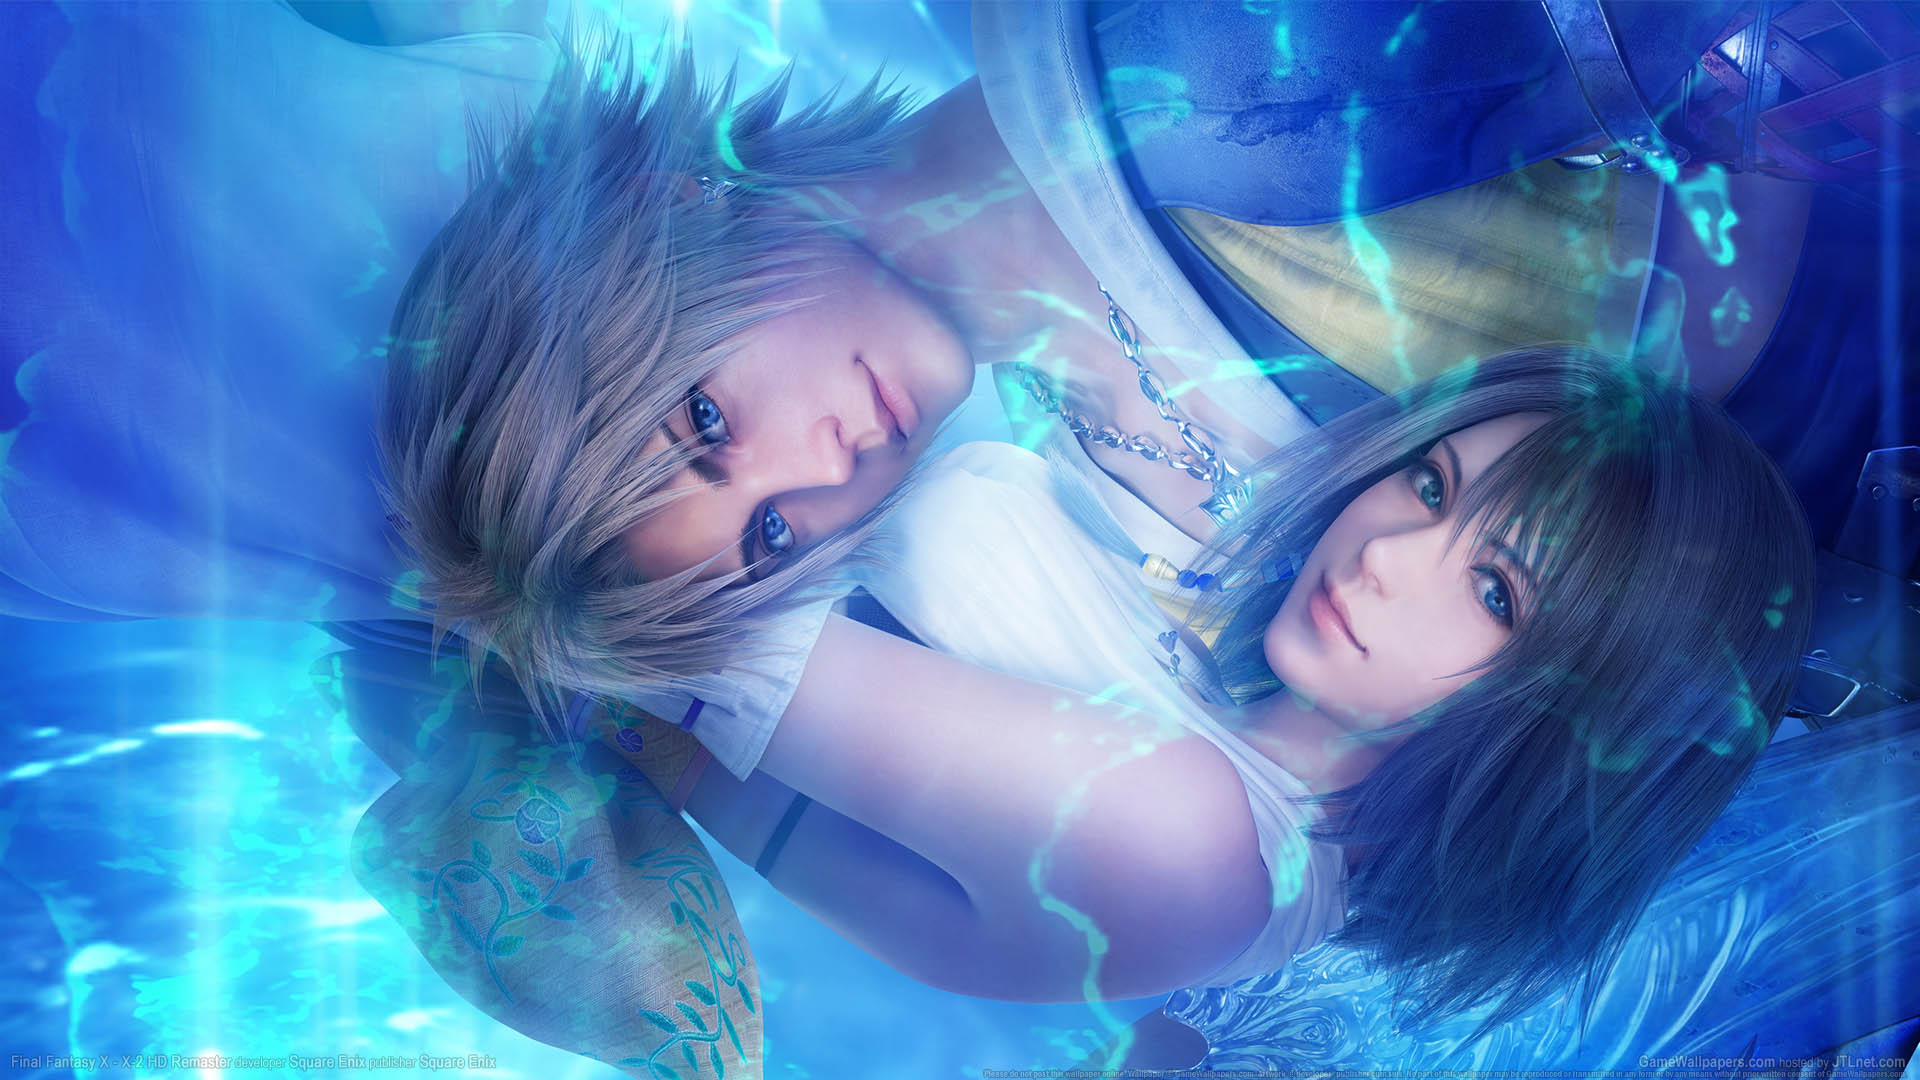 Free Download Final Fantasy X Hd Remaster 16 Steam Pc Review 19x1080 For Your Desktop Mobile Tablet Explore 78 Final Fantasy X Wallpaper Final Fantasy Images Wallpapers Final Fantasy